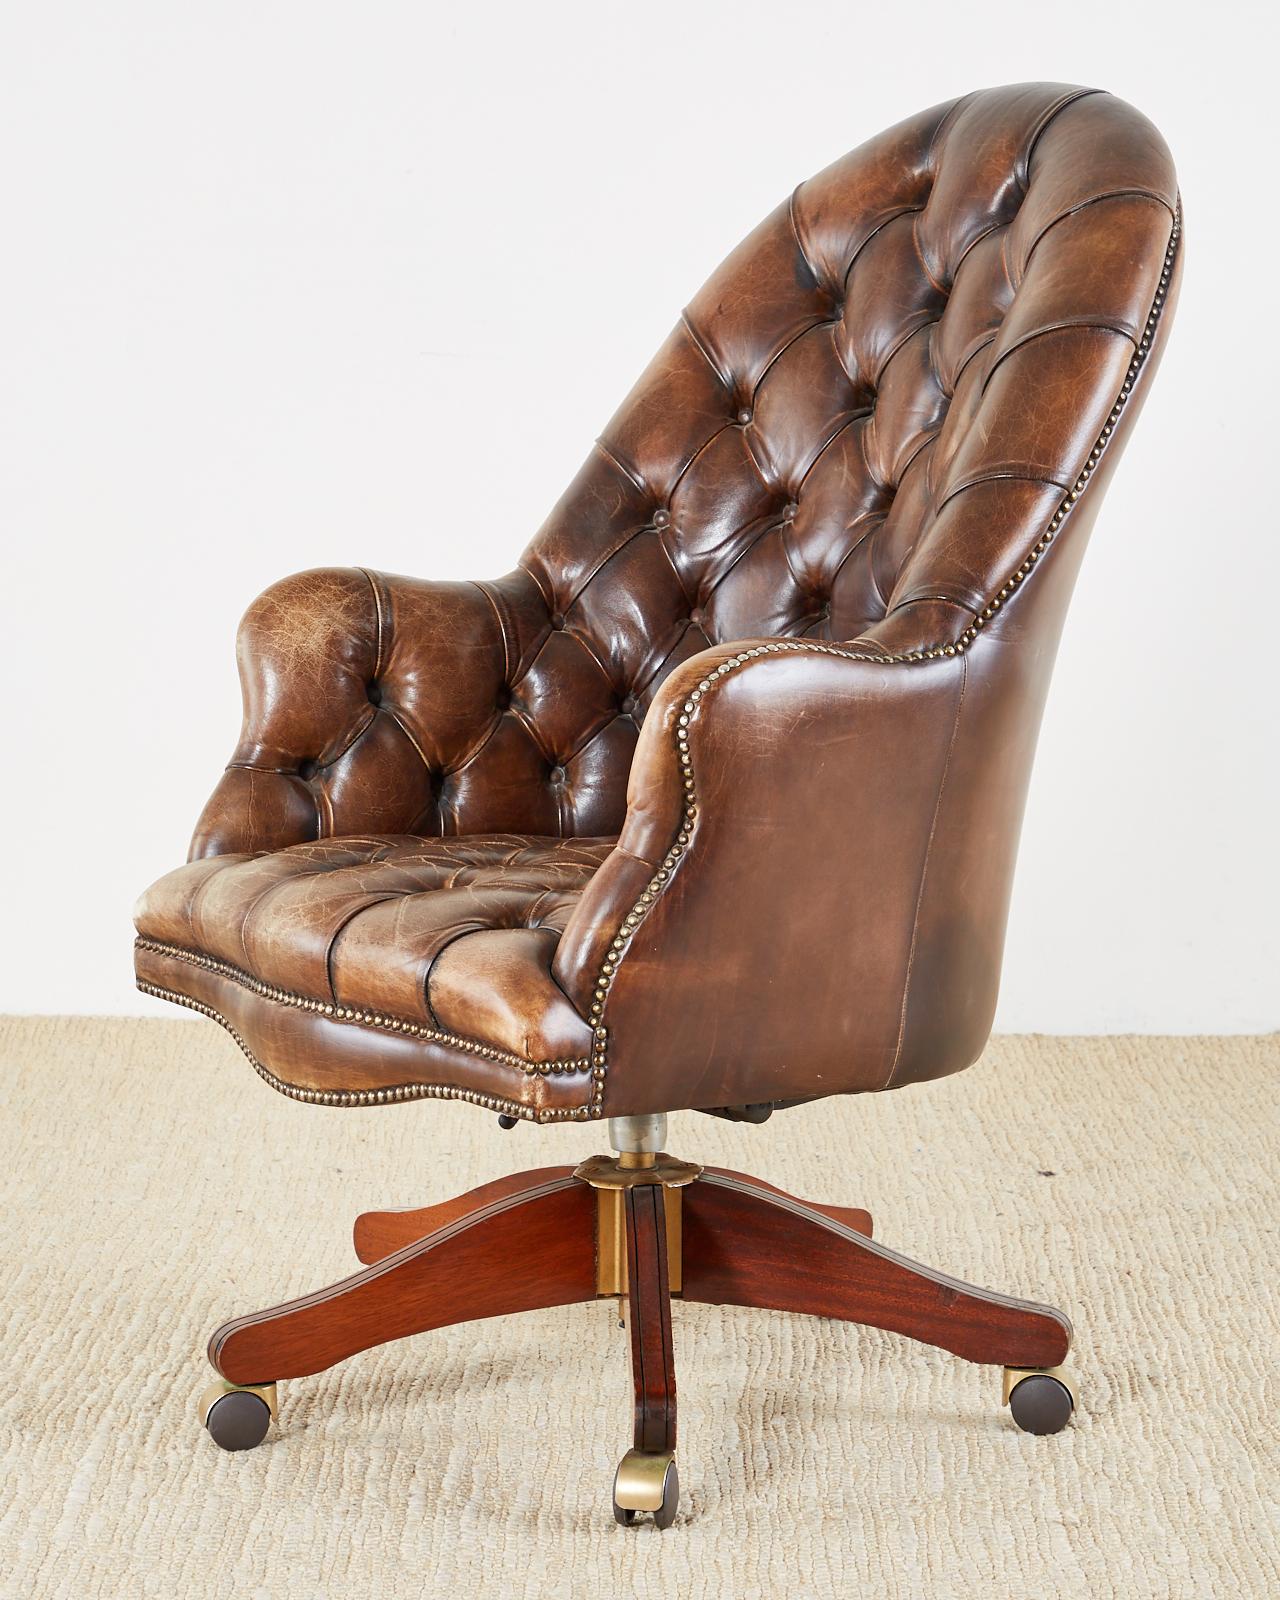 tufted leather desk chair